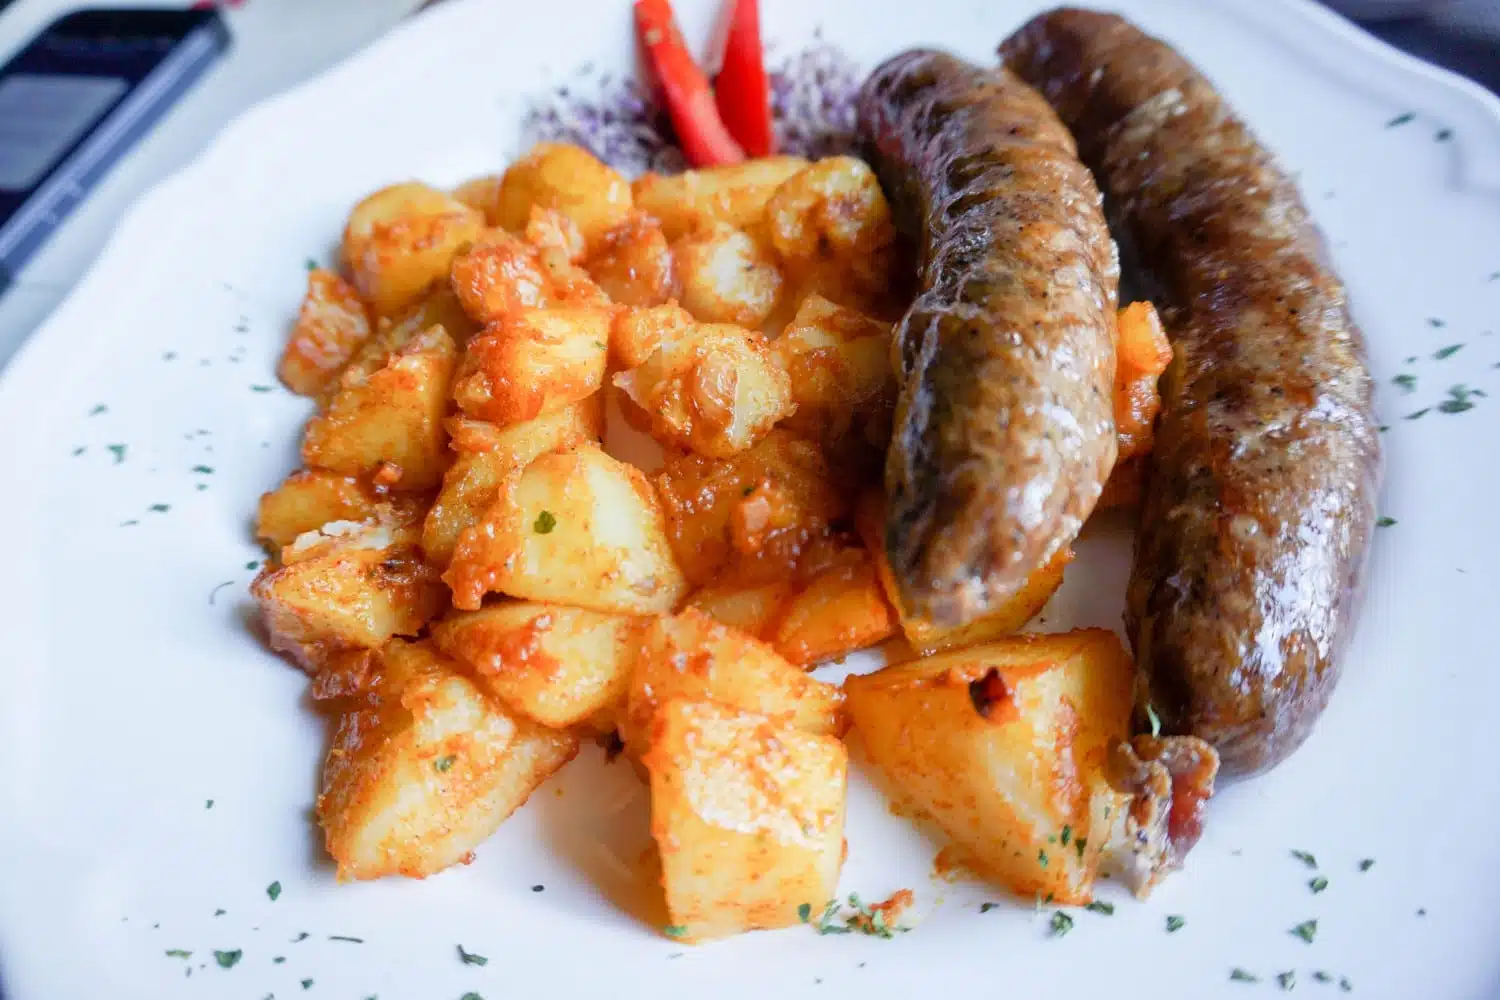 Croatian Sausages at Zagreb's Best Restaurant